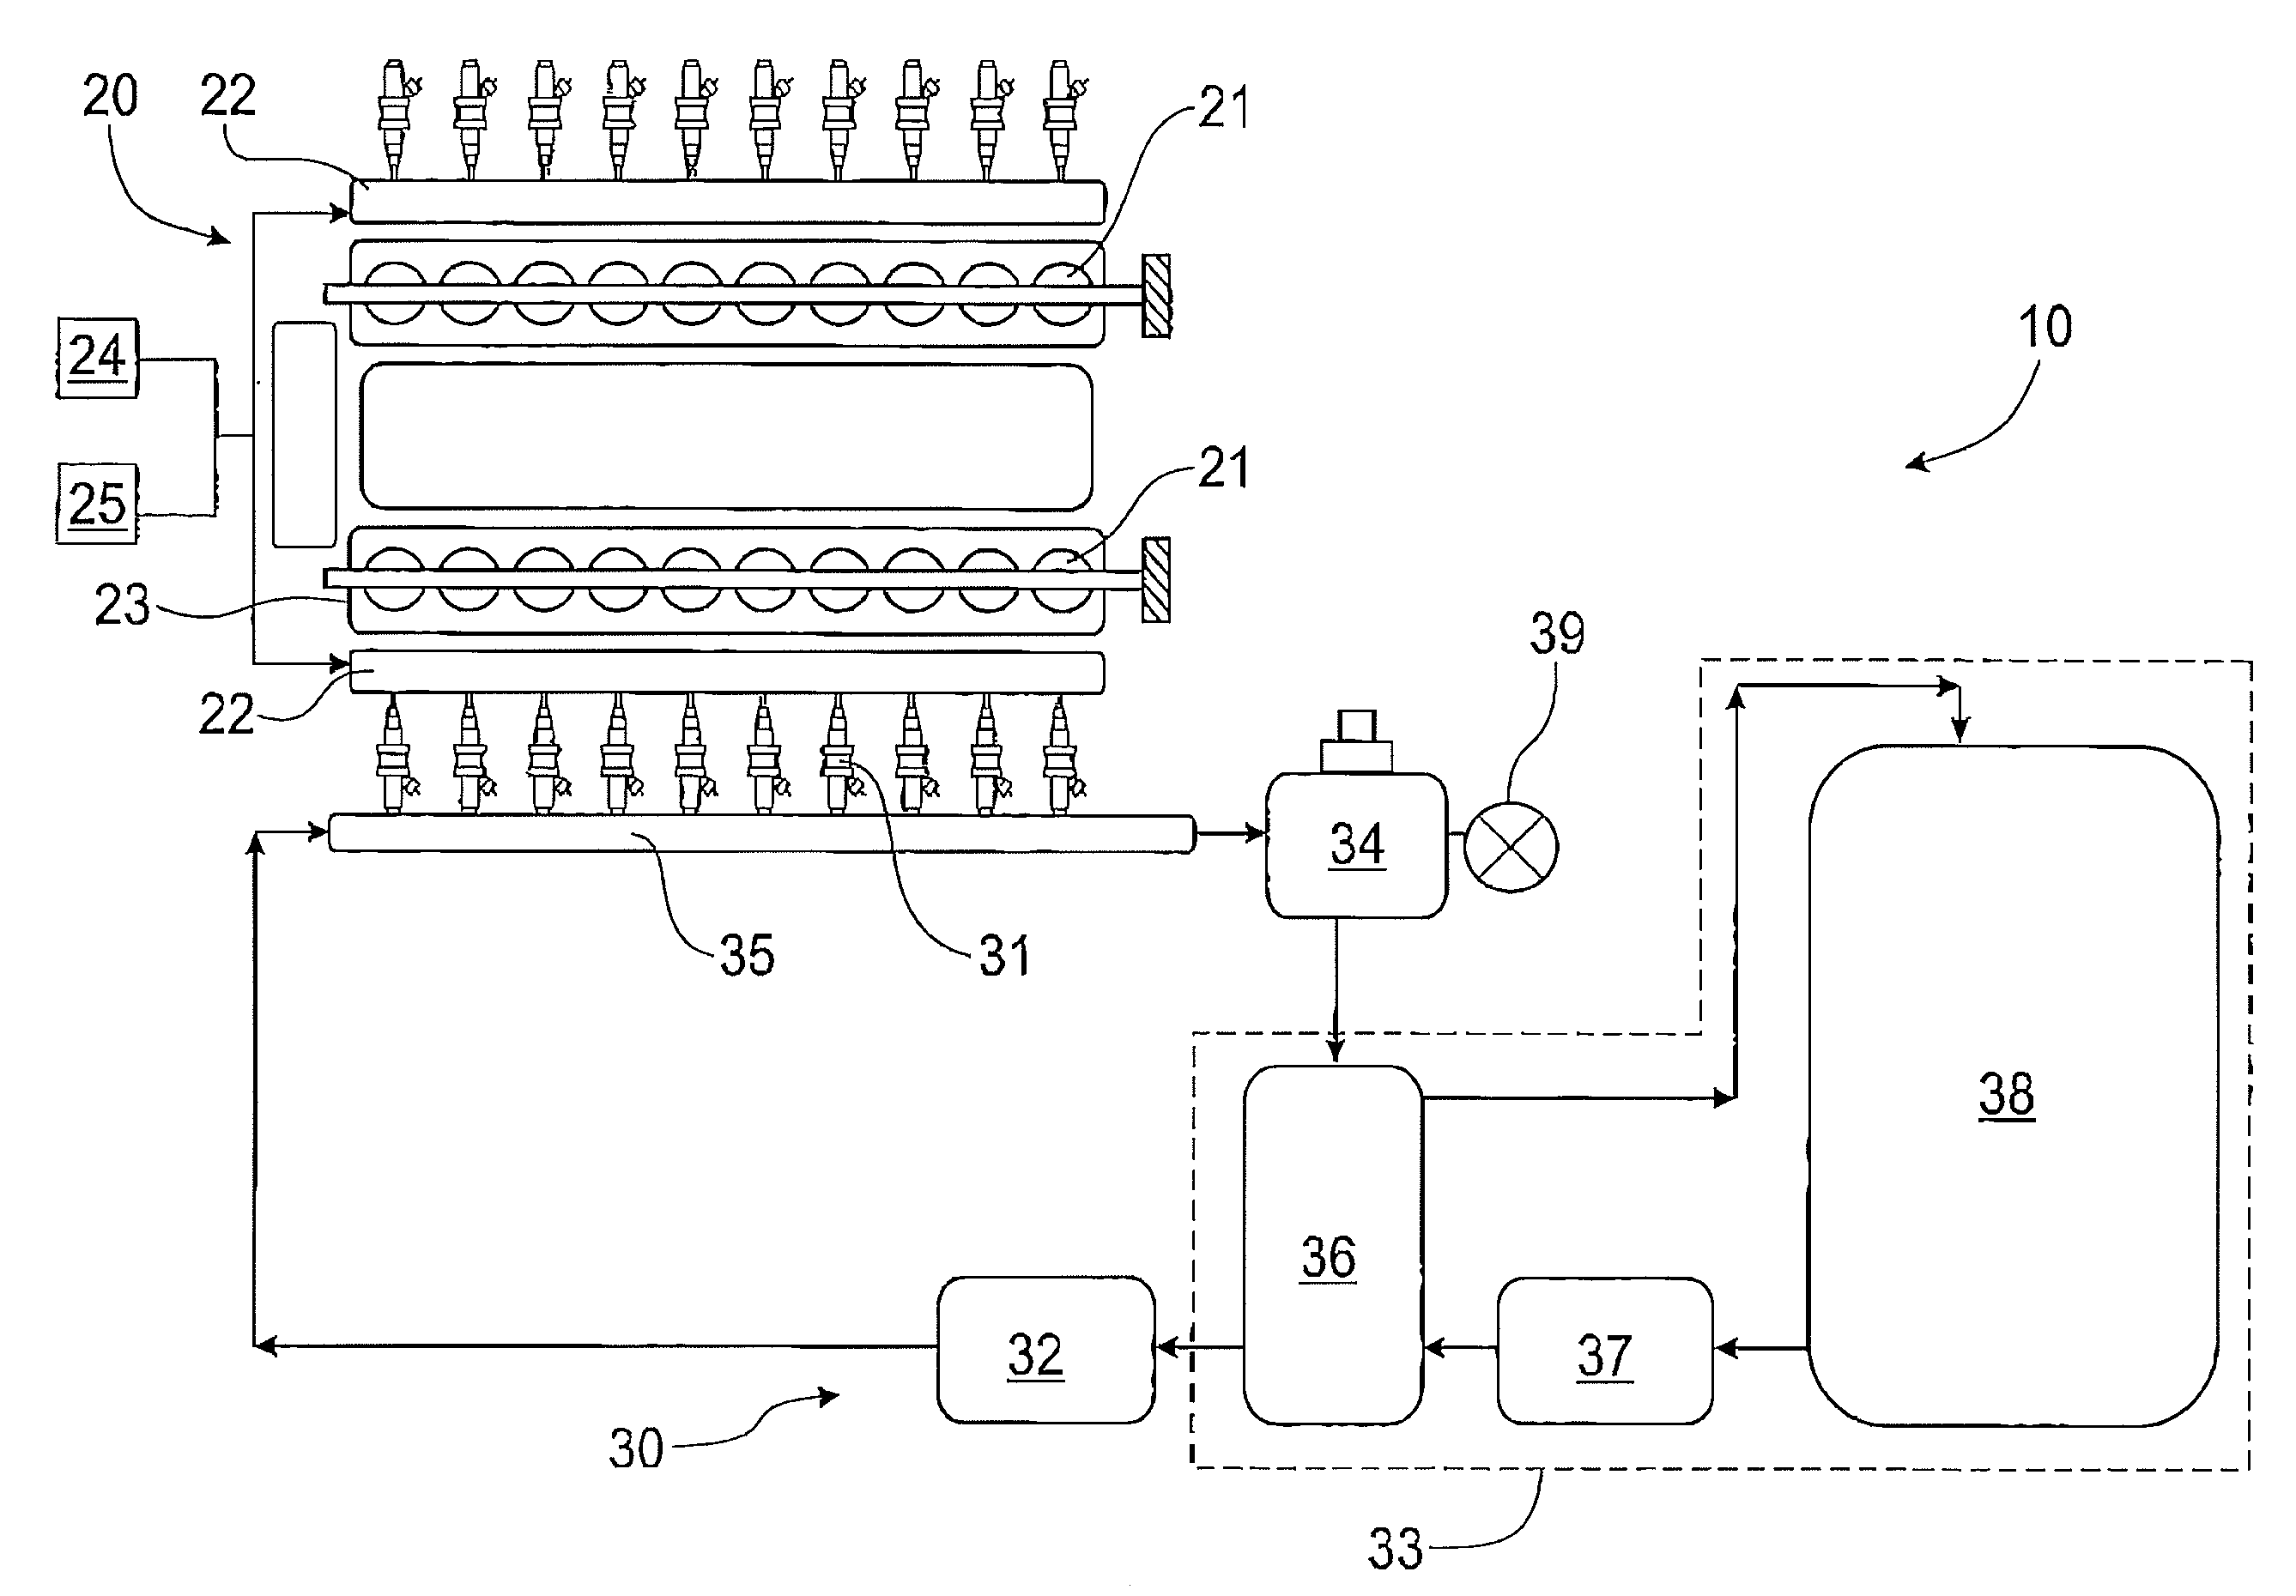 System and method for engine lubrication